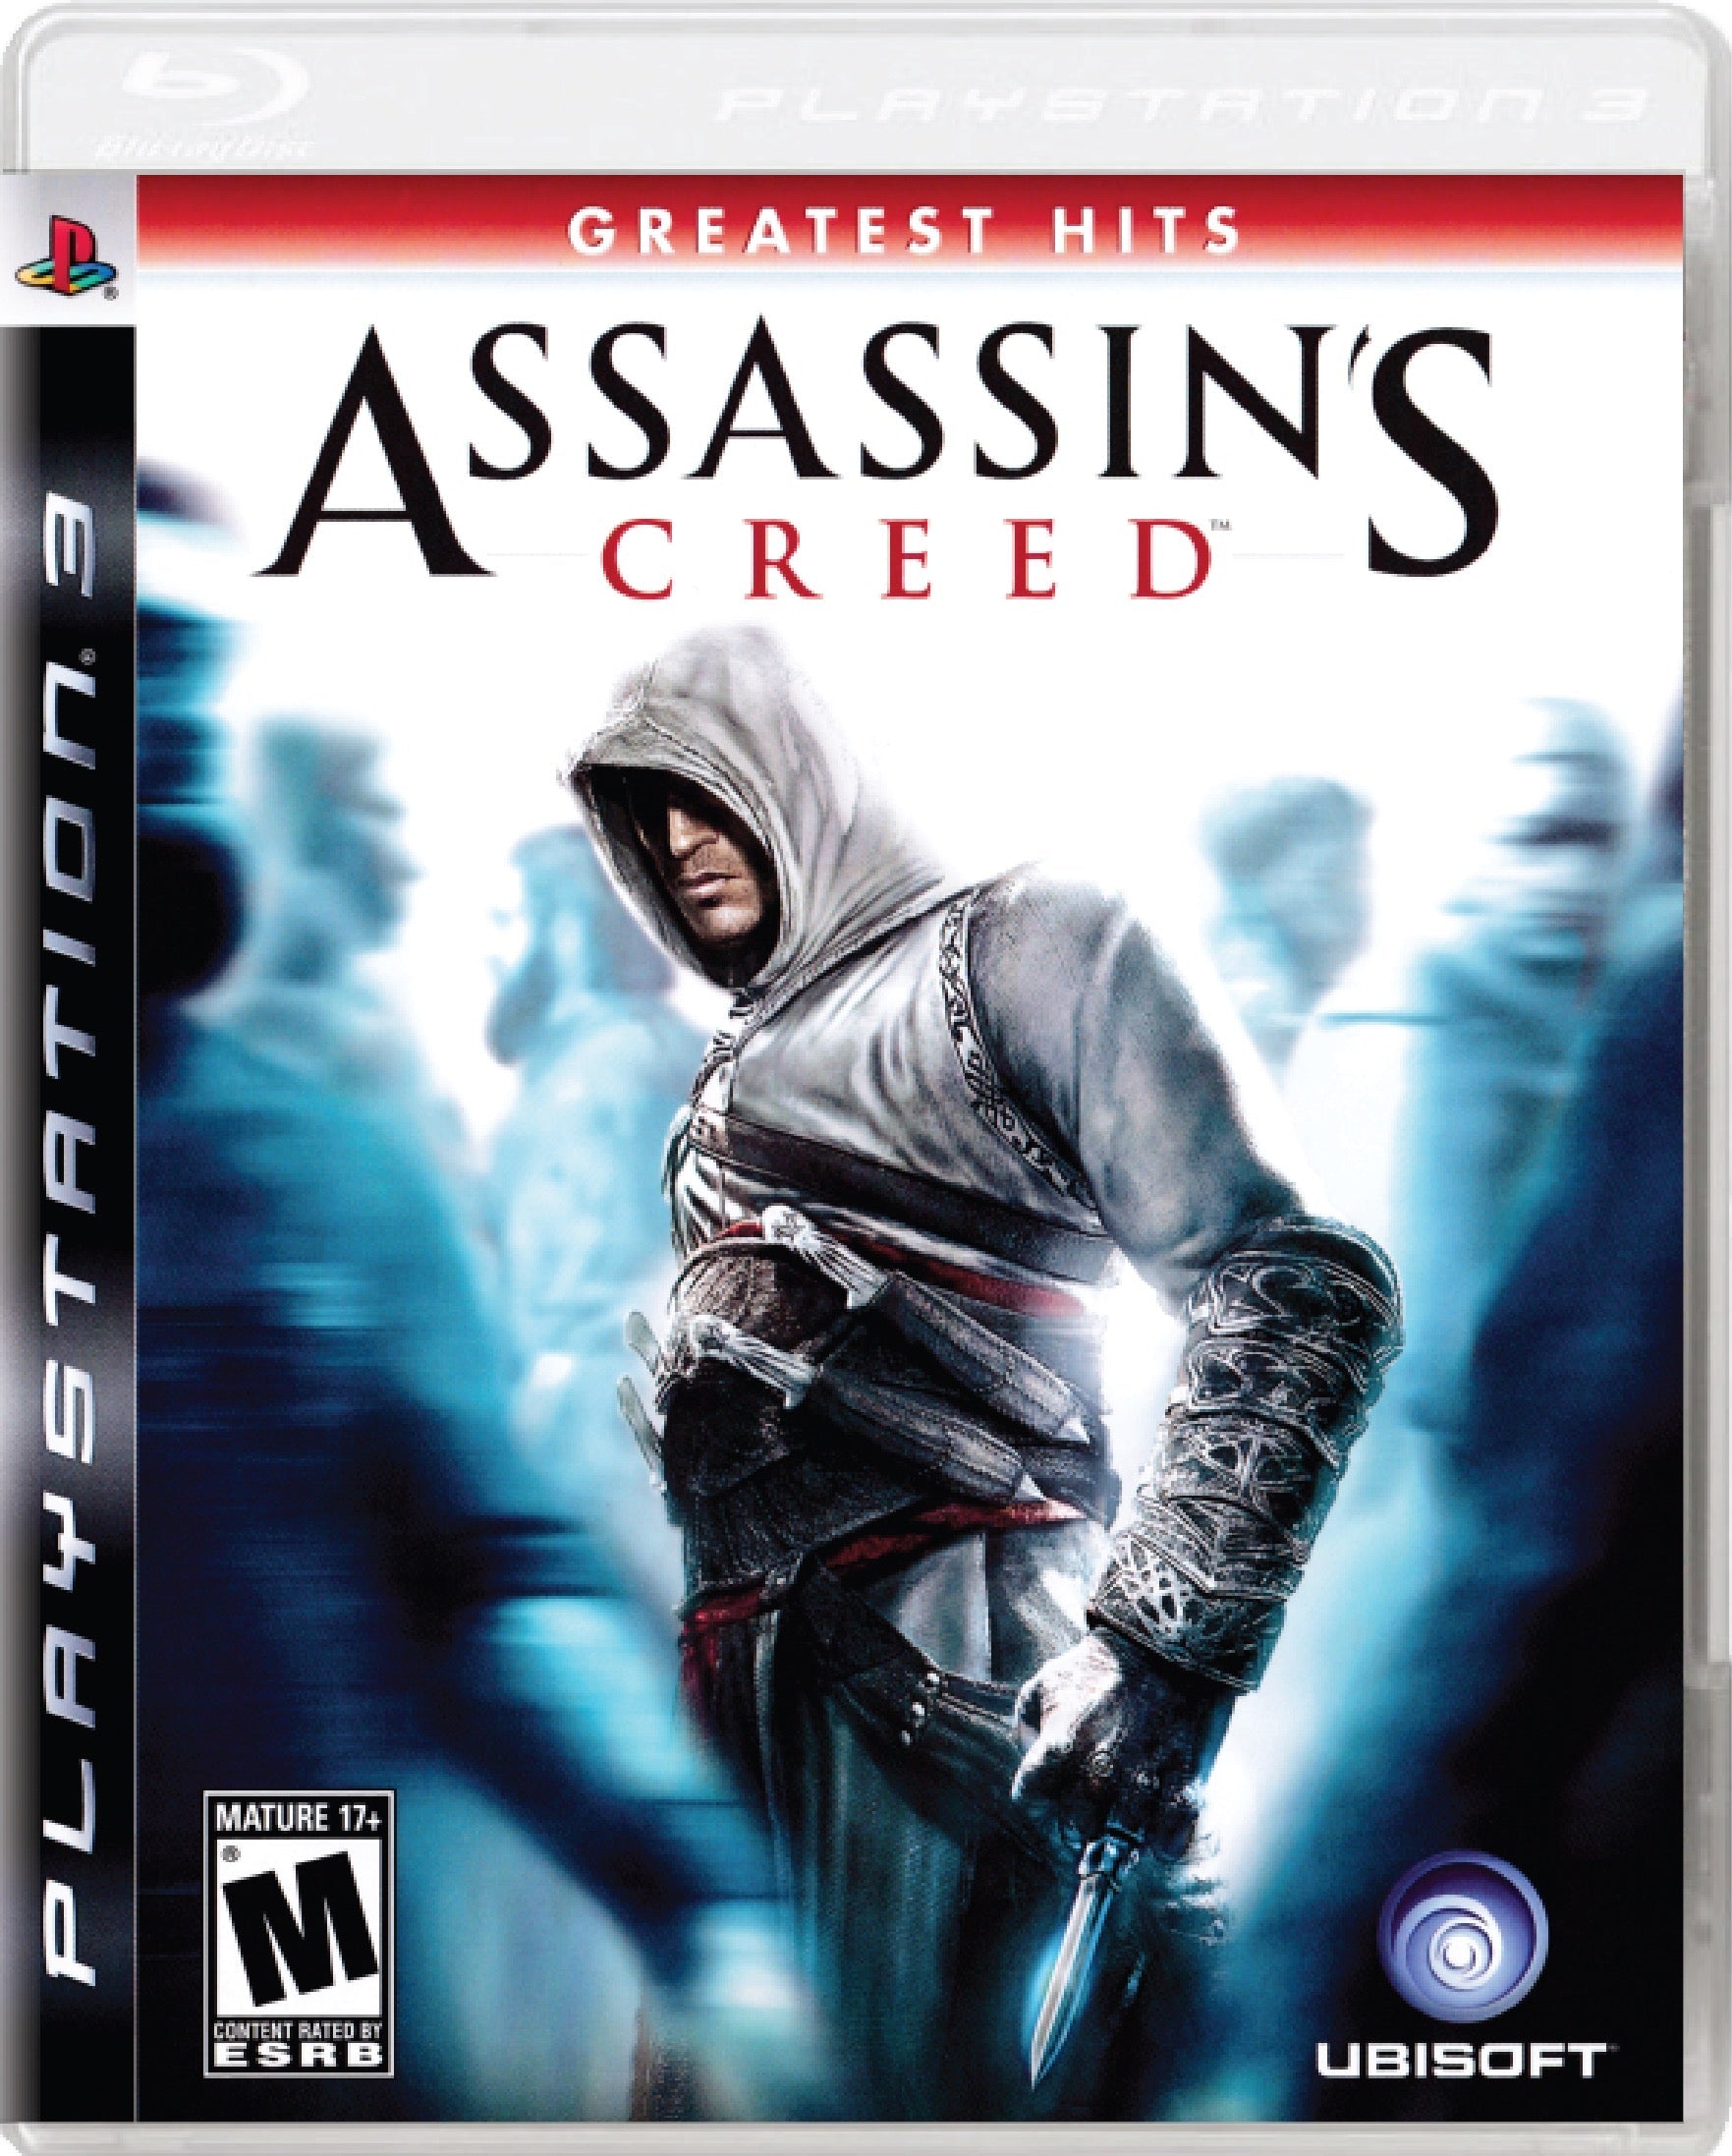 Assassin's Creed Cover Art